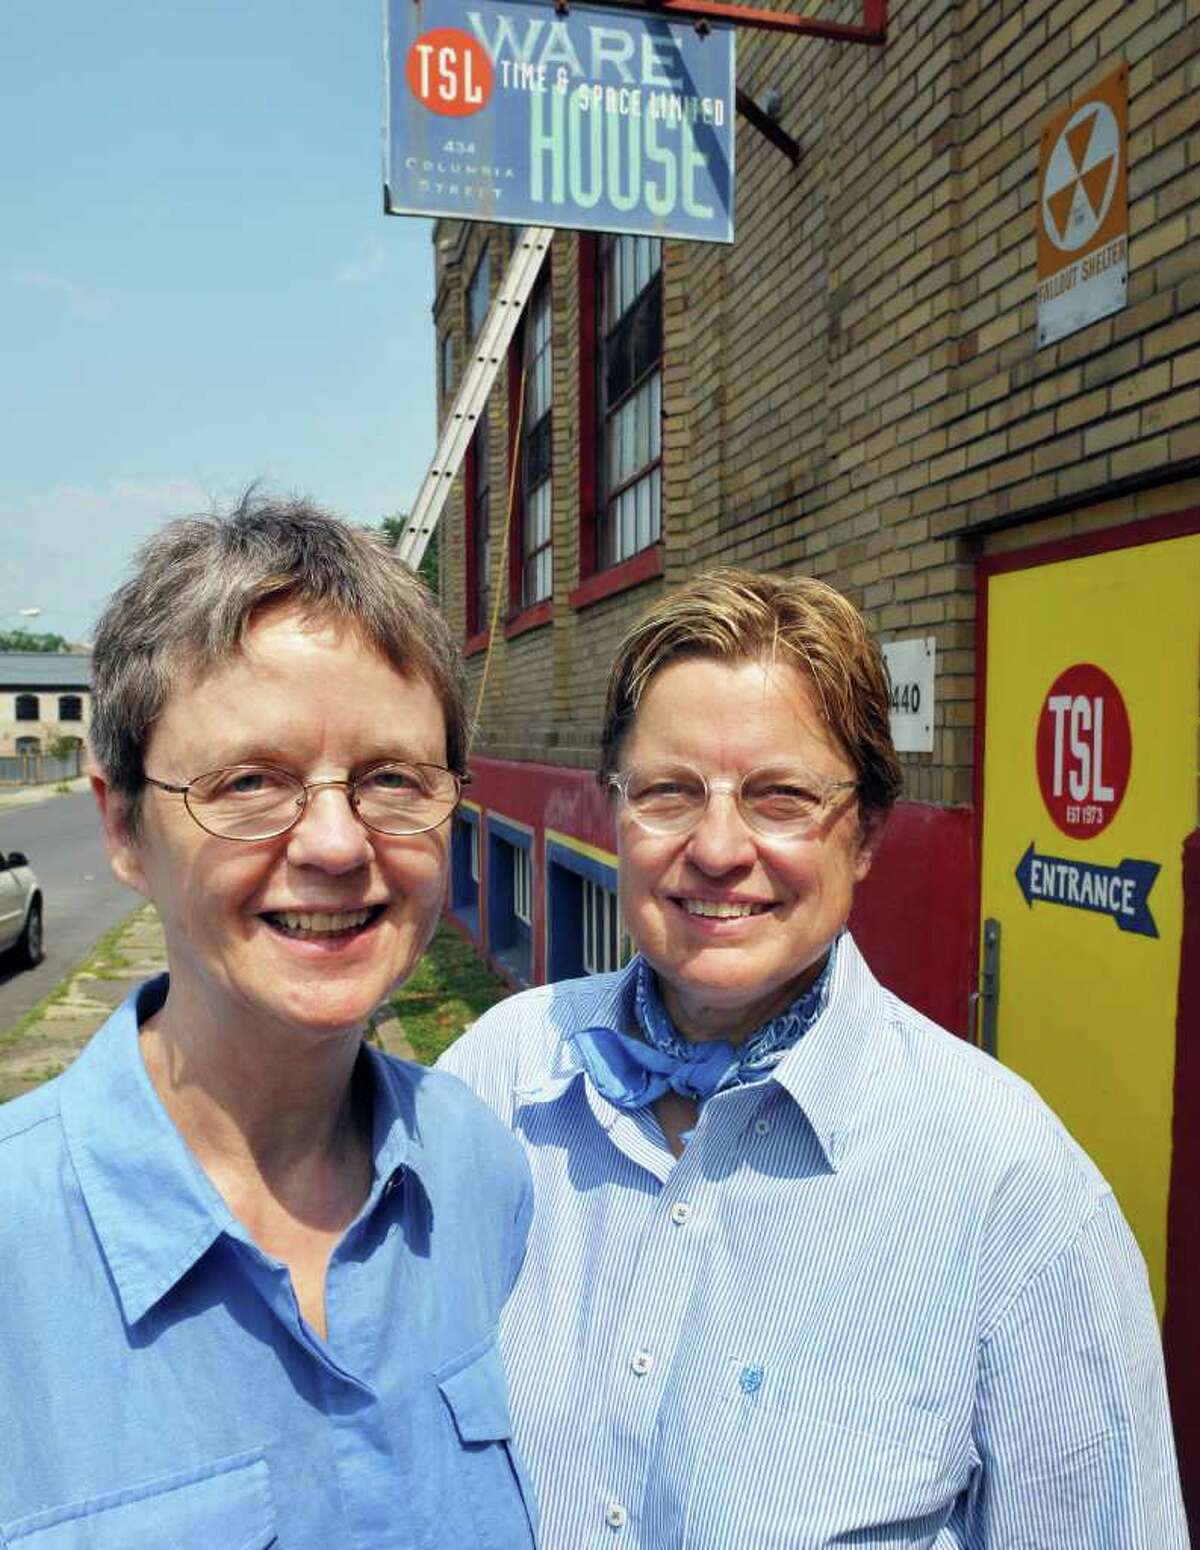 Claudia Bruce and Linda Mussmann, who have been together more than 35 years and want to be the first same-sex couple married under the new law, outside Time and Space Limited in Hudson Wednesday July 20, 2011. (John Carl D'Annibale / Times Union)